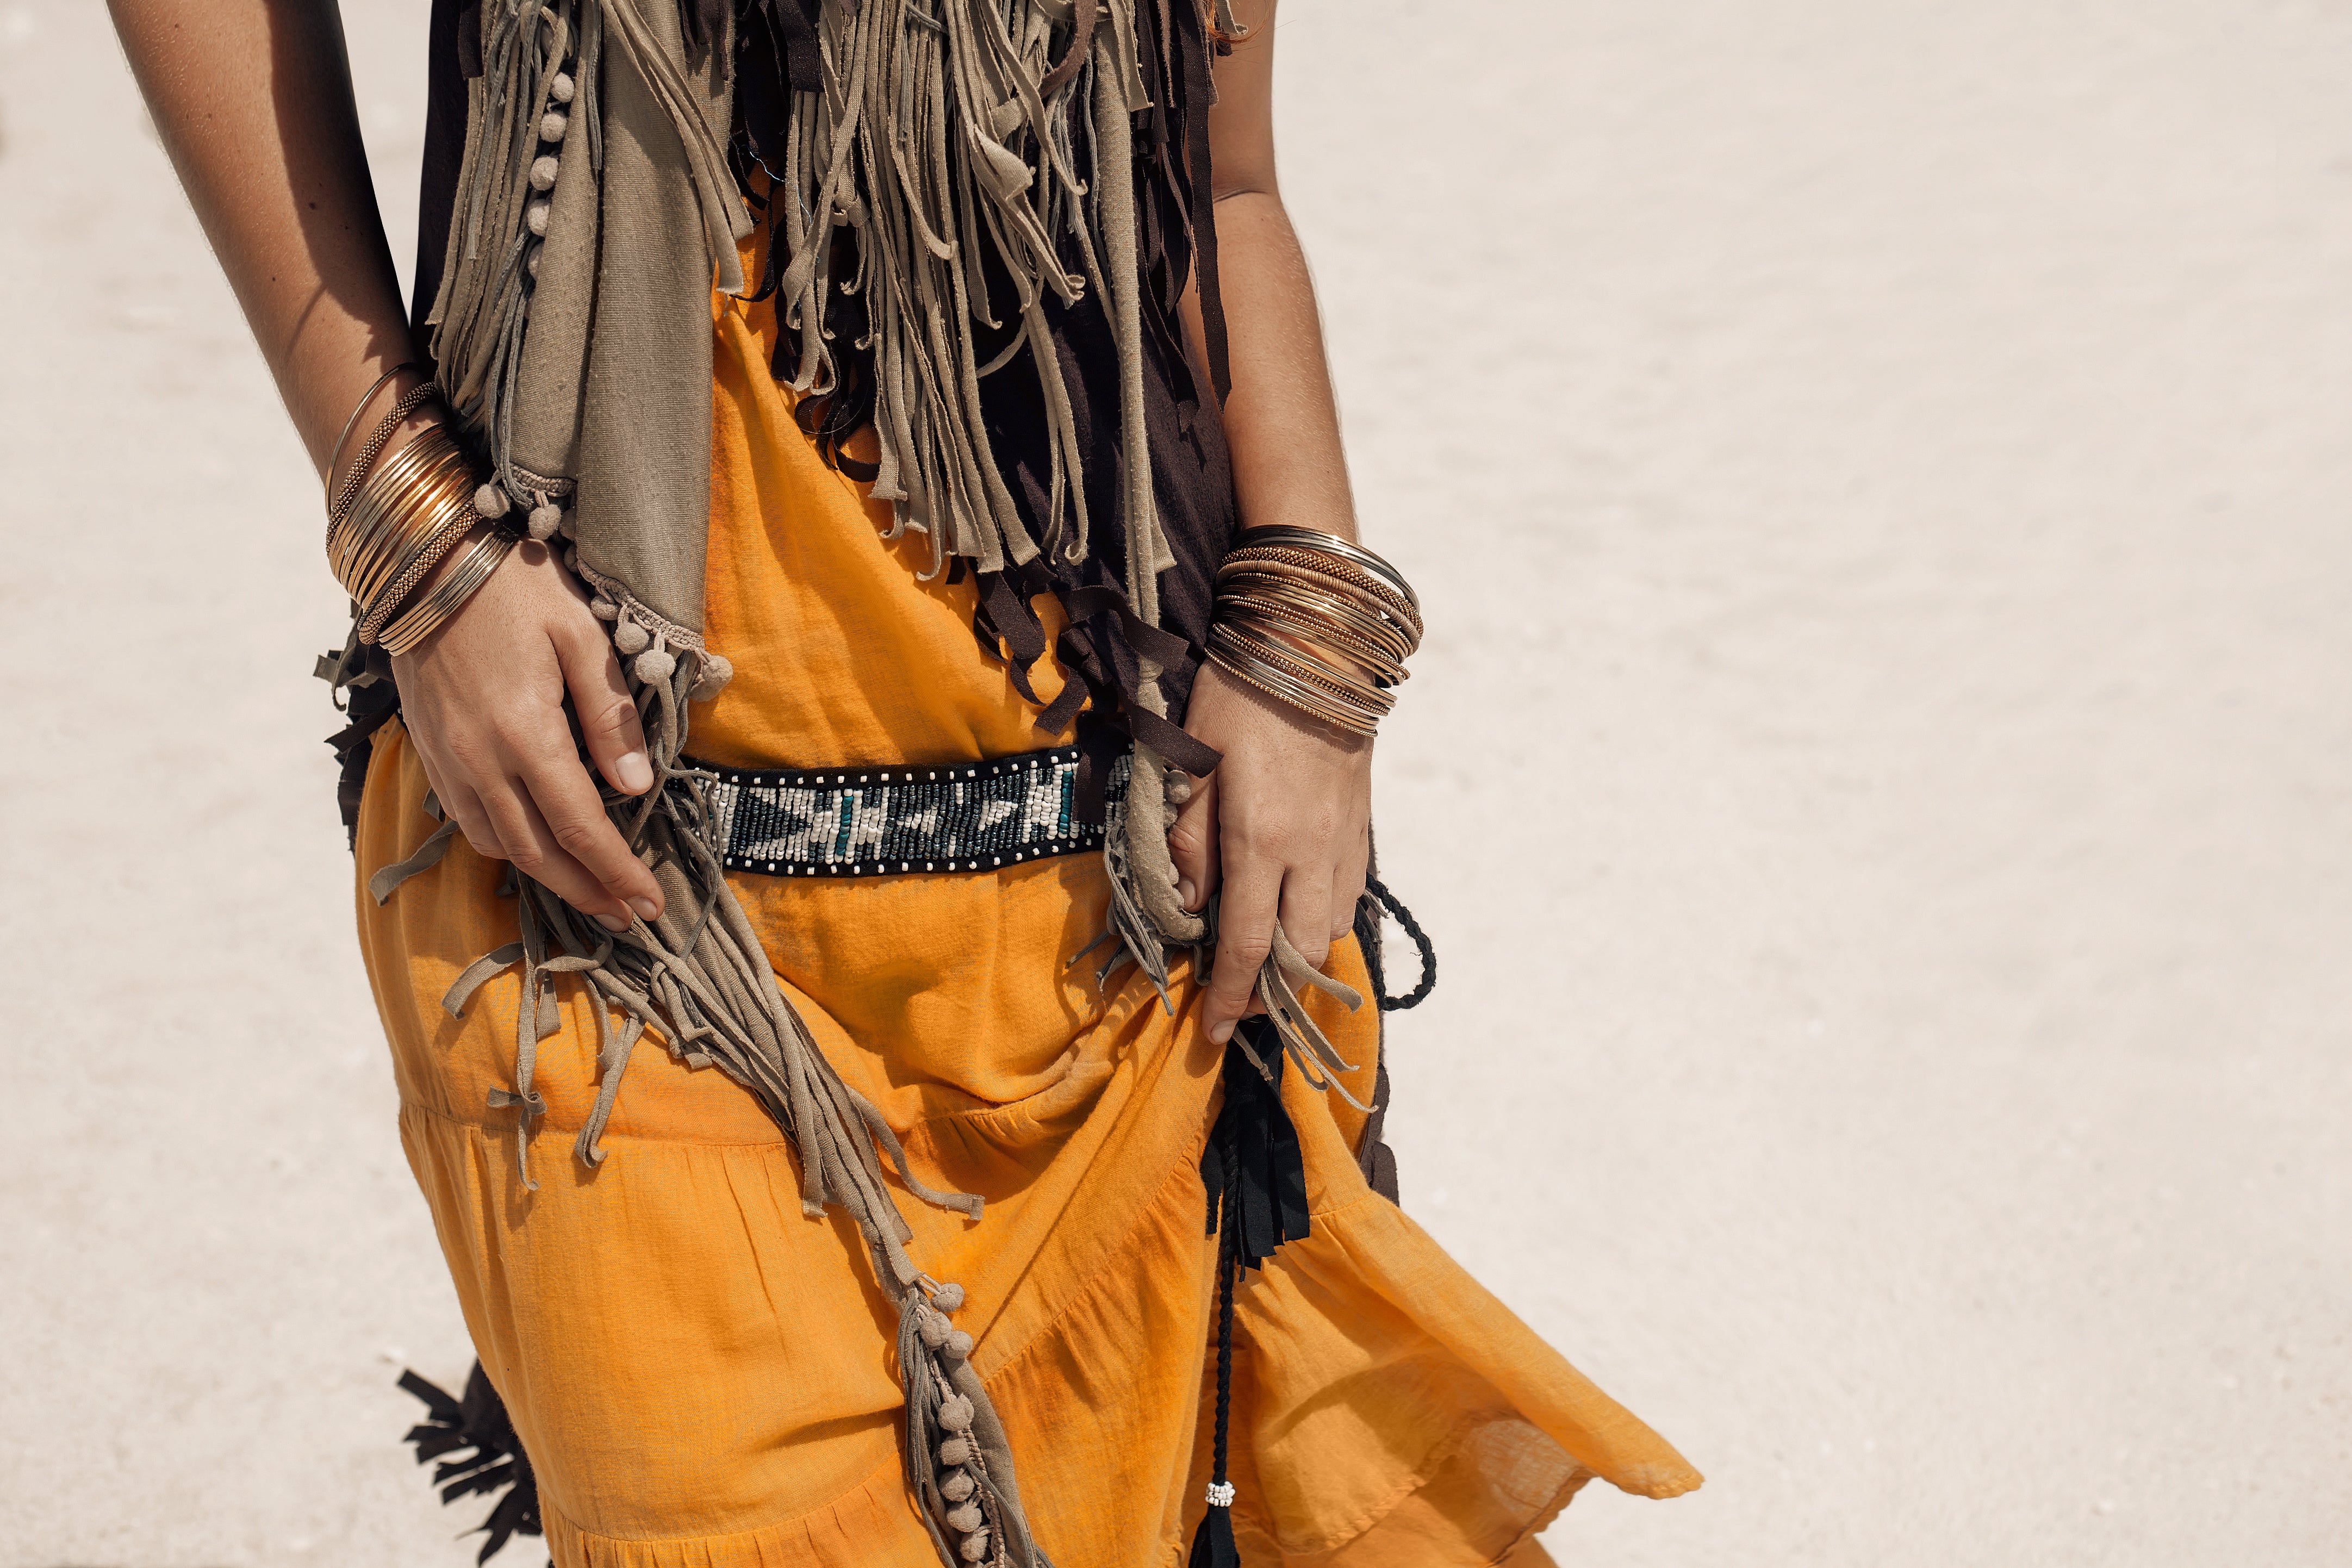 Is Boho Fashion Appreciation Or Appropriation?: The History and Importance of Bohemian Fashion